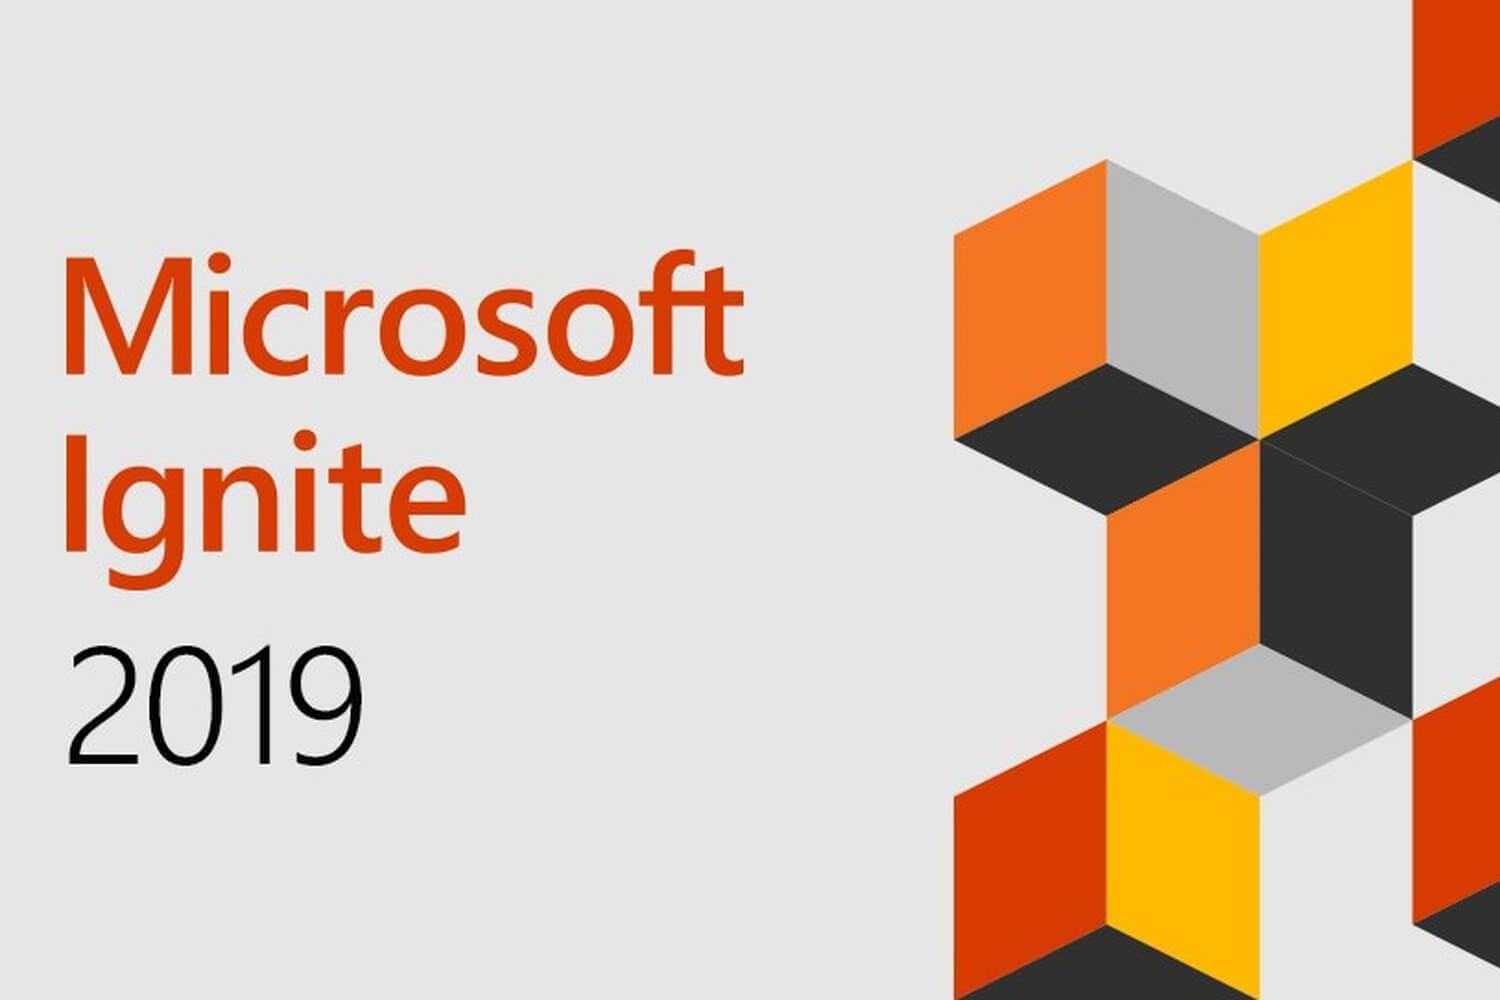 Download all Microsoft Ignite 2019 slide decks and videos with script